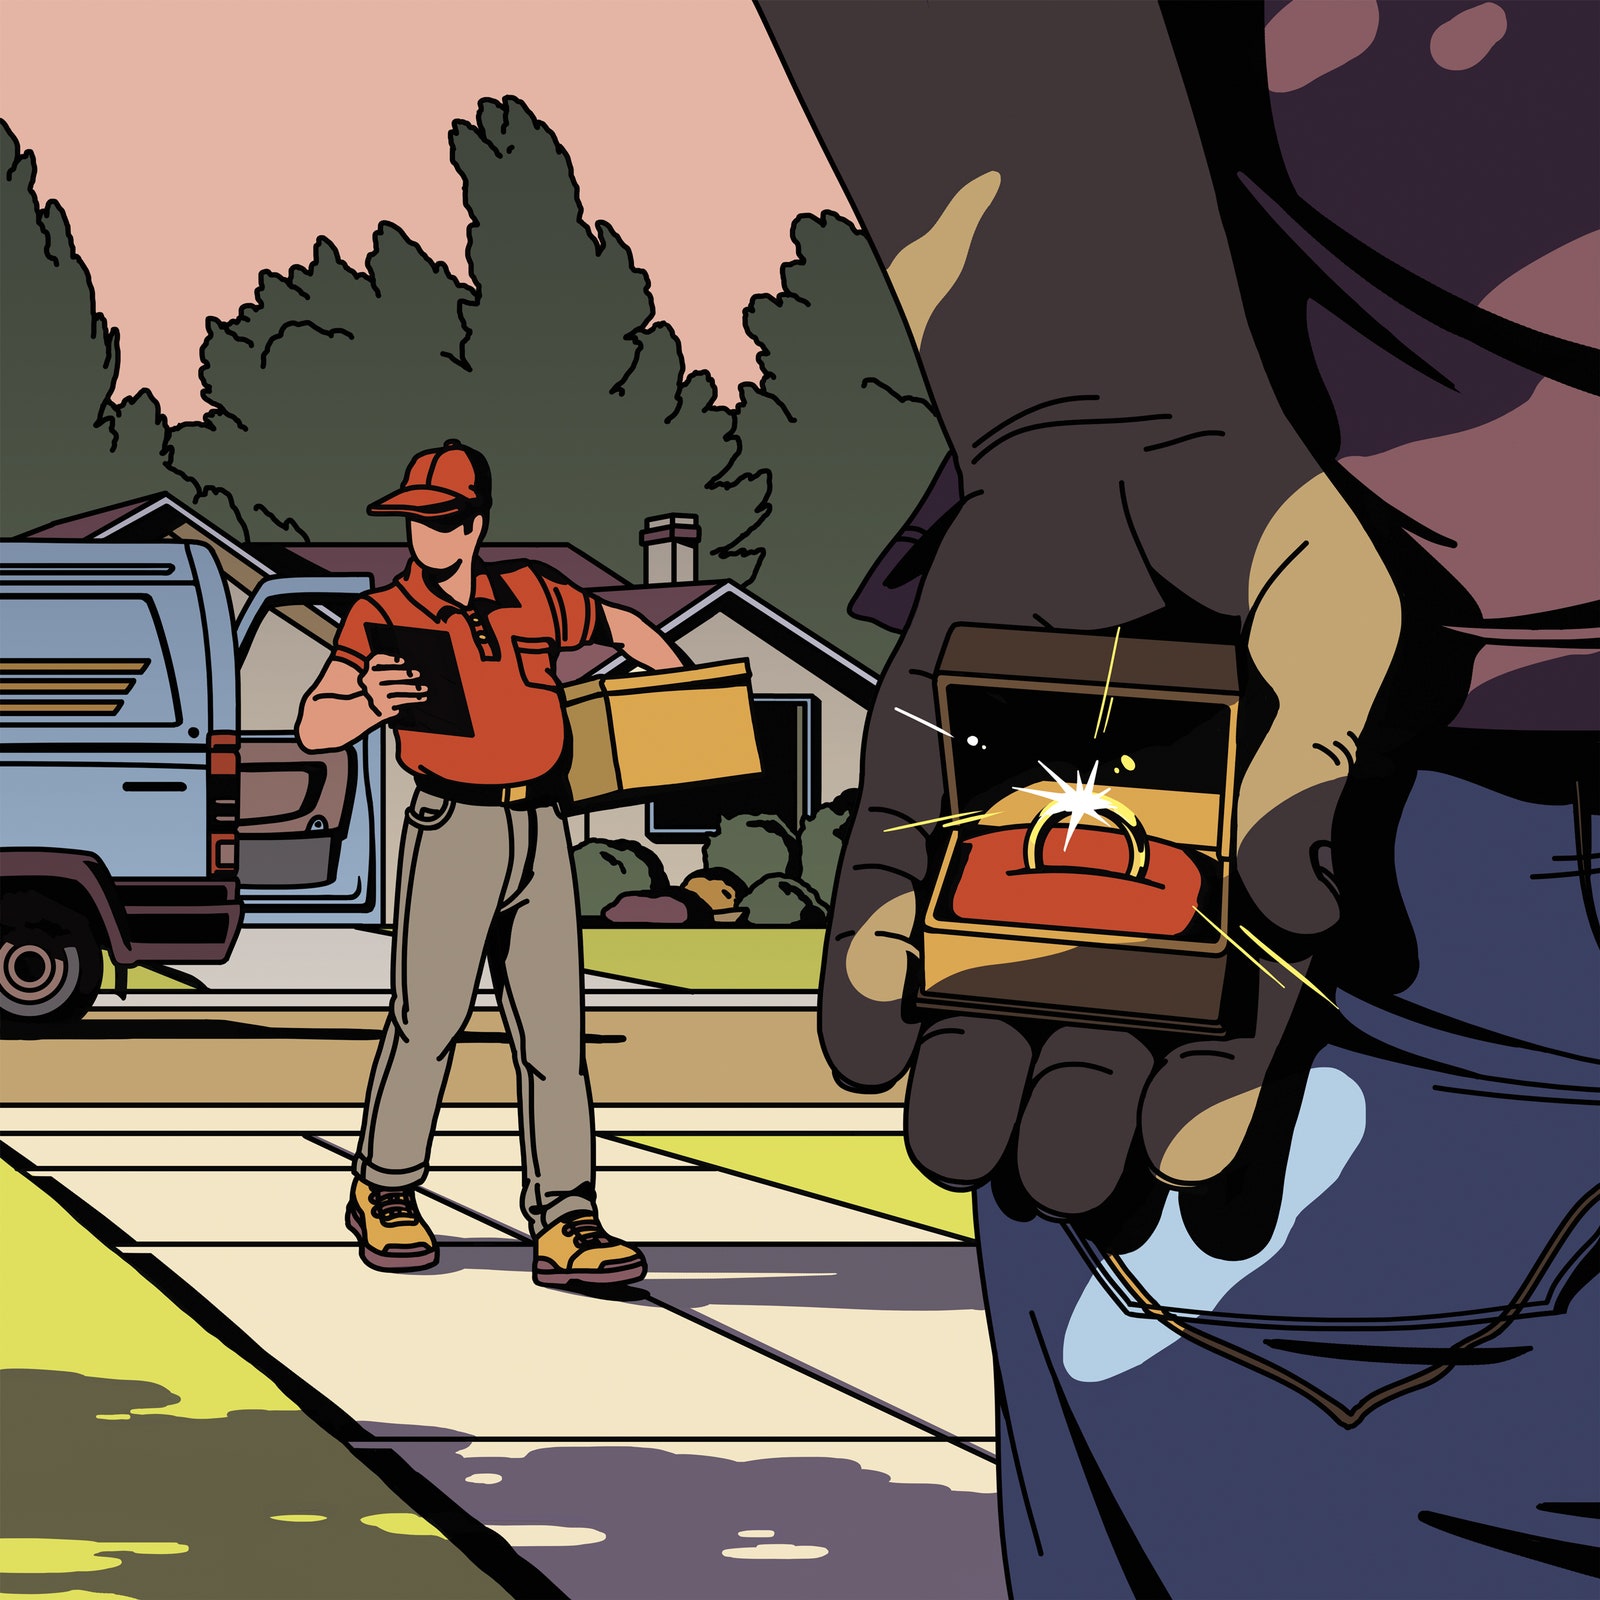 an illustration of someone about to propose to a deliveryman